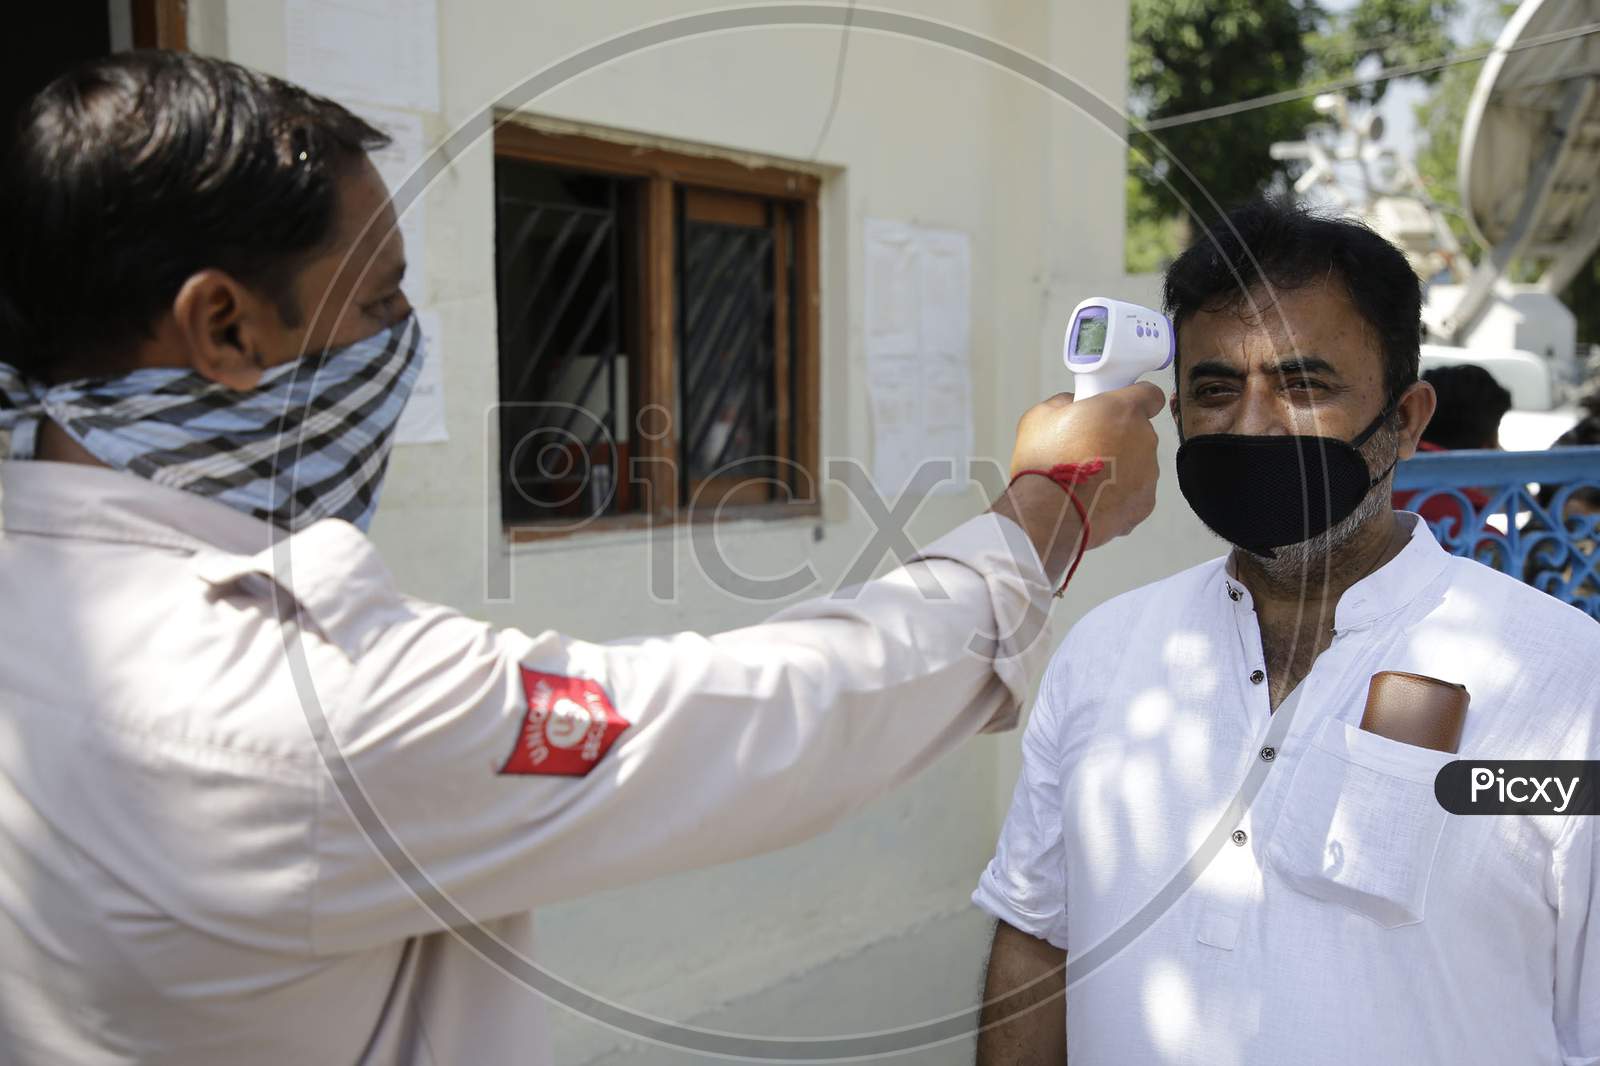 School staff being checked for body temperature before allowing  with circles to ensure social distancing  among students as preparations are underway to open the educational institutions in Jammu for select classes after nearly six months closure due to the outbreak of Coronavirus pandemic on Septe